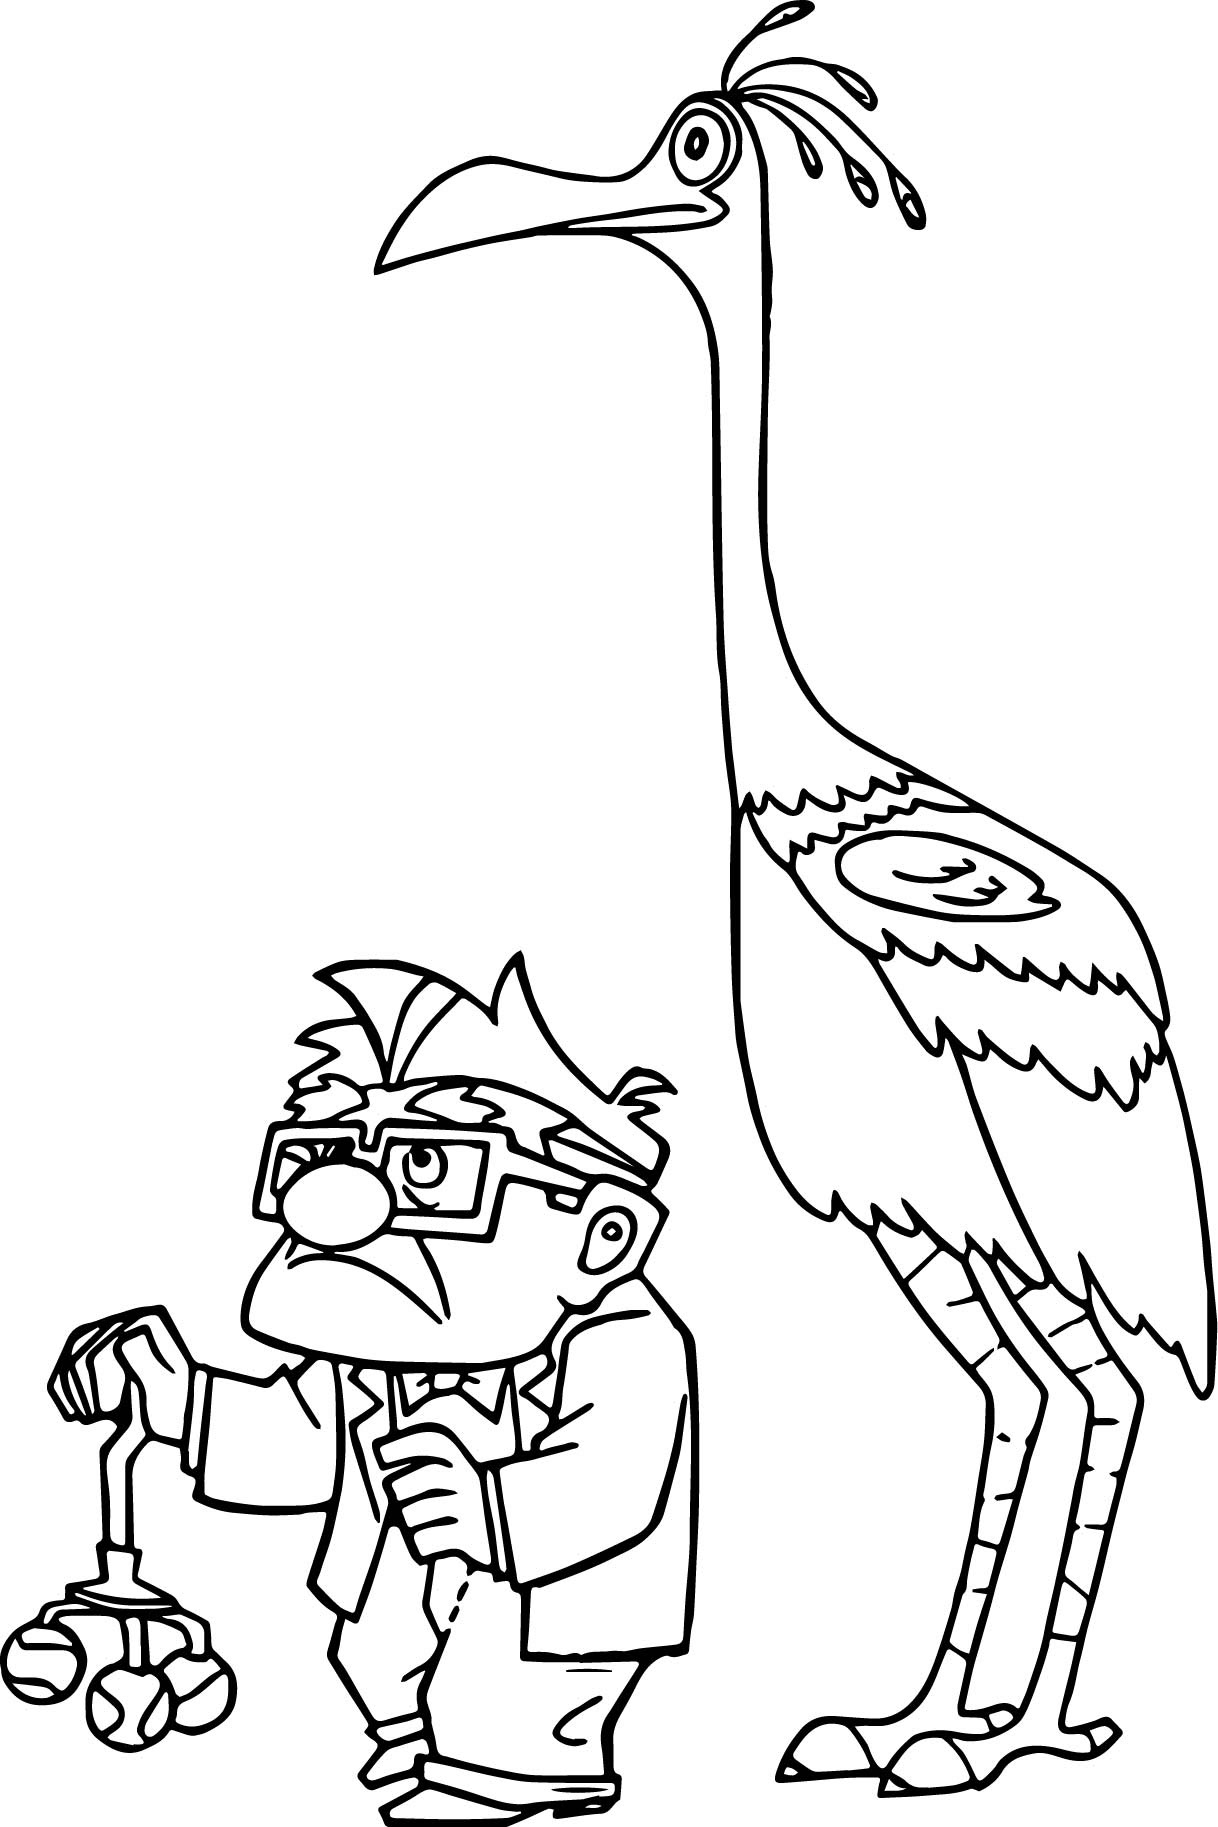 Featured image of post Pixar Up Coloring Pages / Make a coloring book with up house pixar for one click.